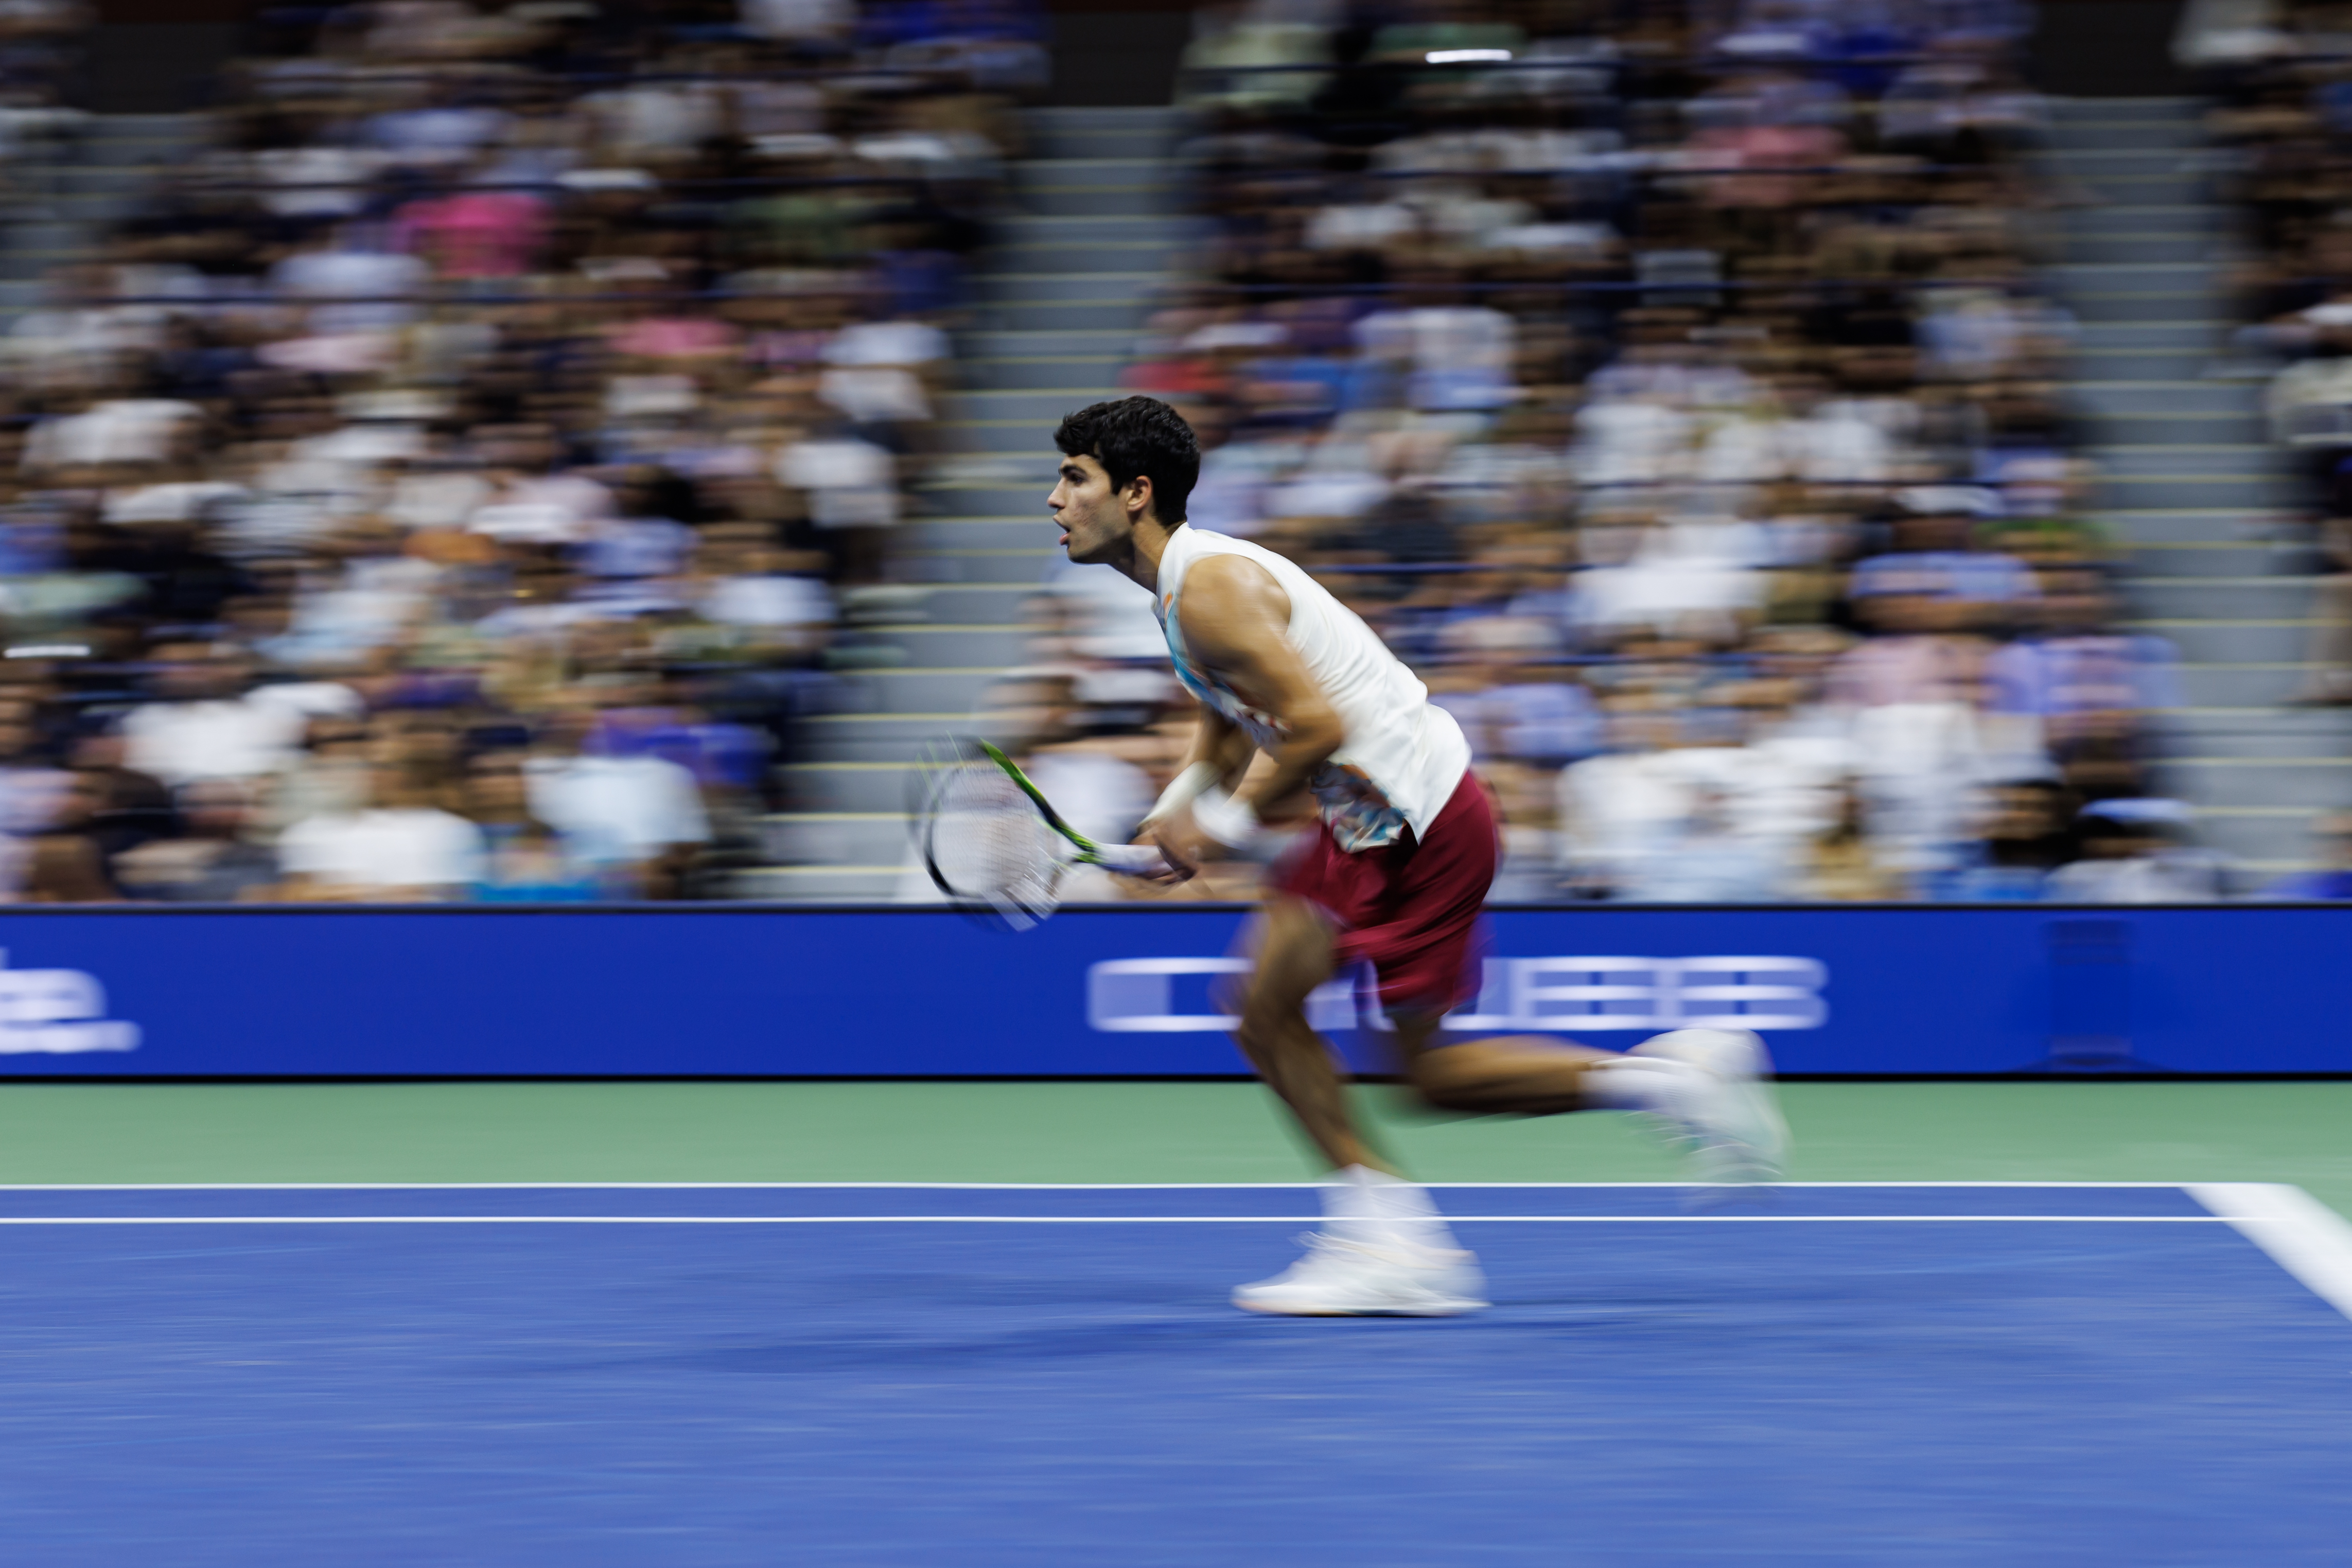 A photo of Carlos Alcaraz running for the tennis ball, with his mouth open.